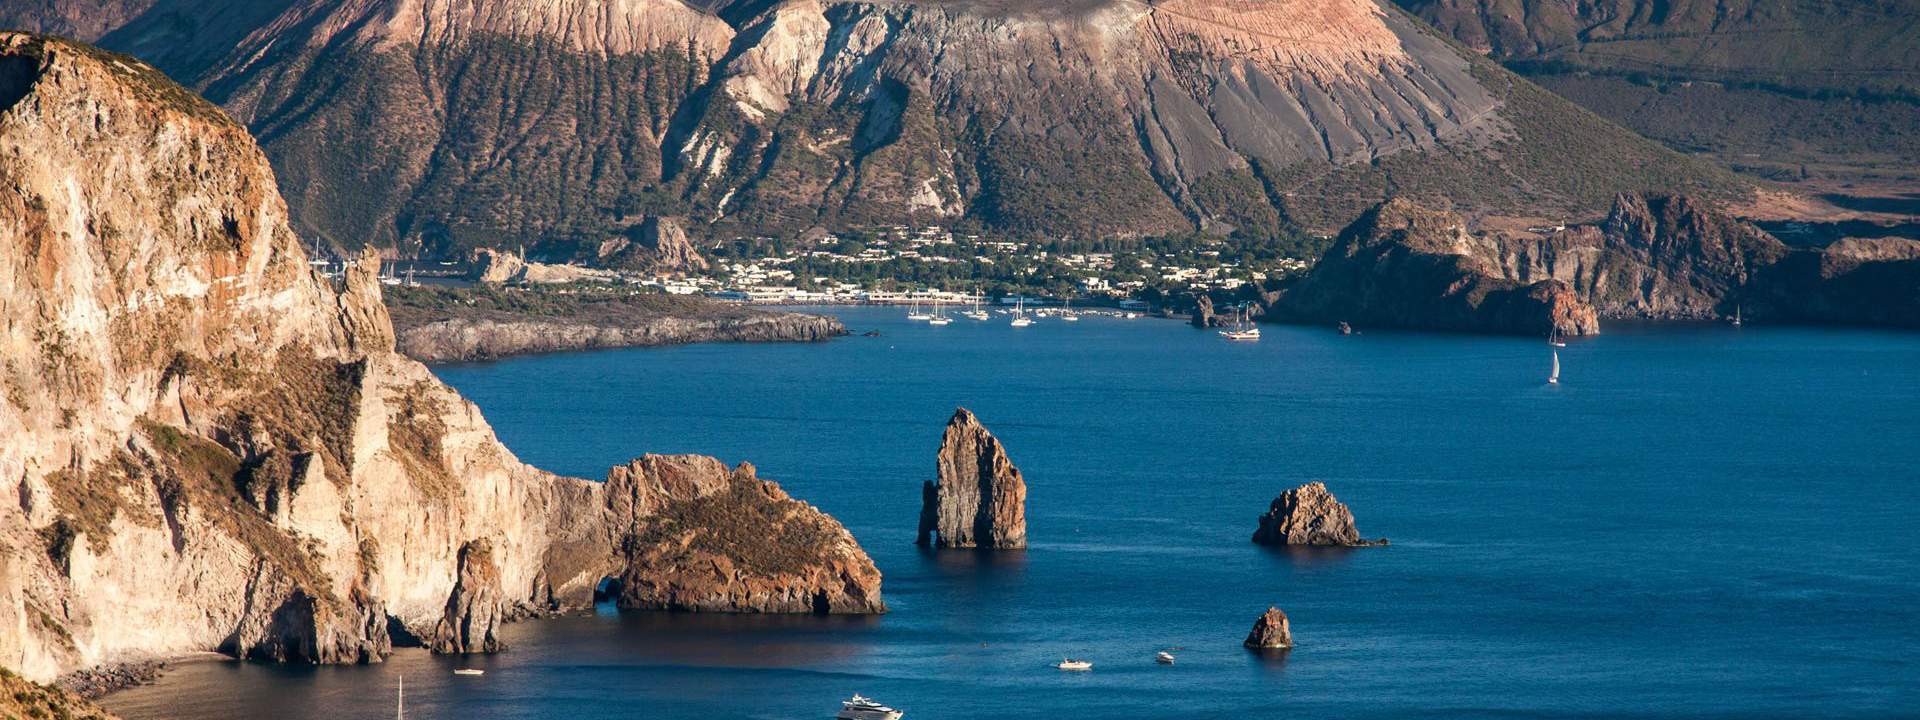 Discover the gems of Sicily, the Aeolian Islands